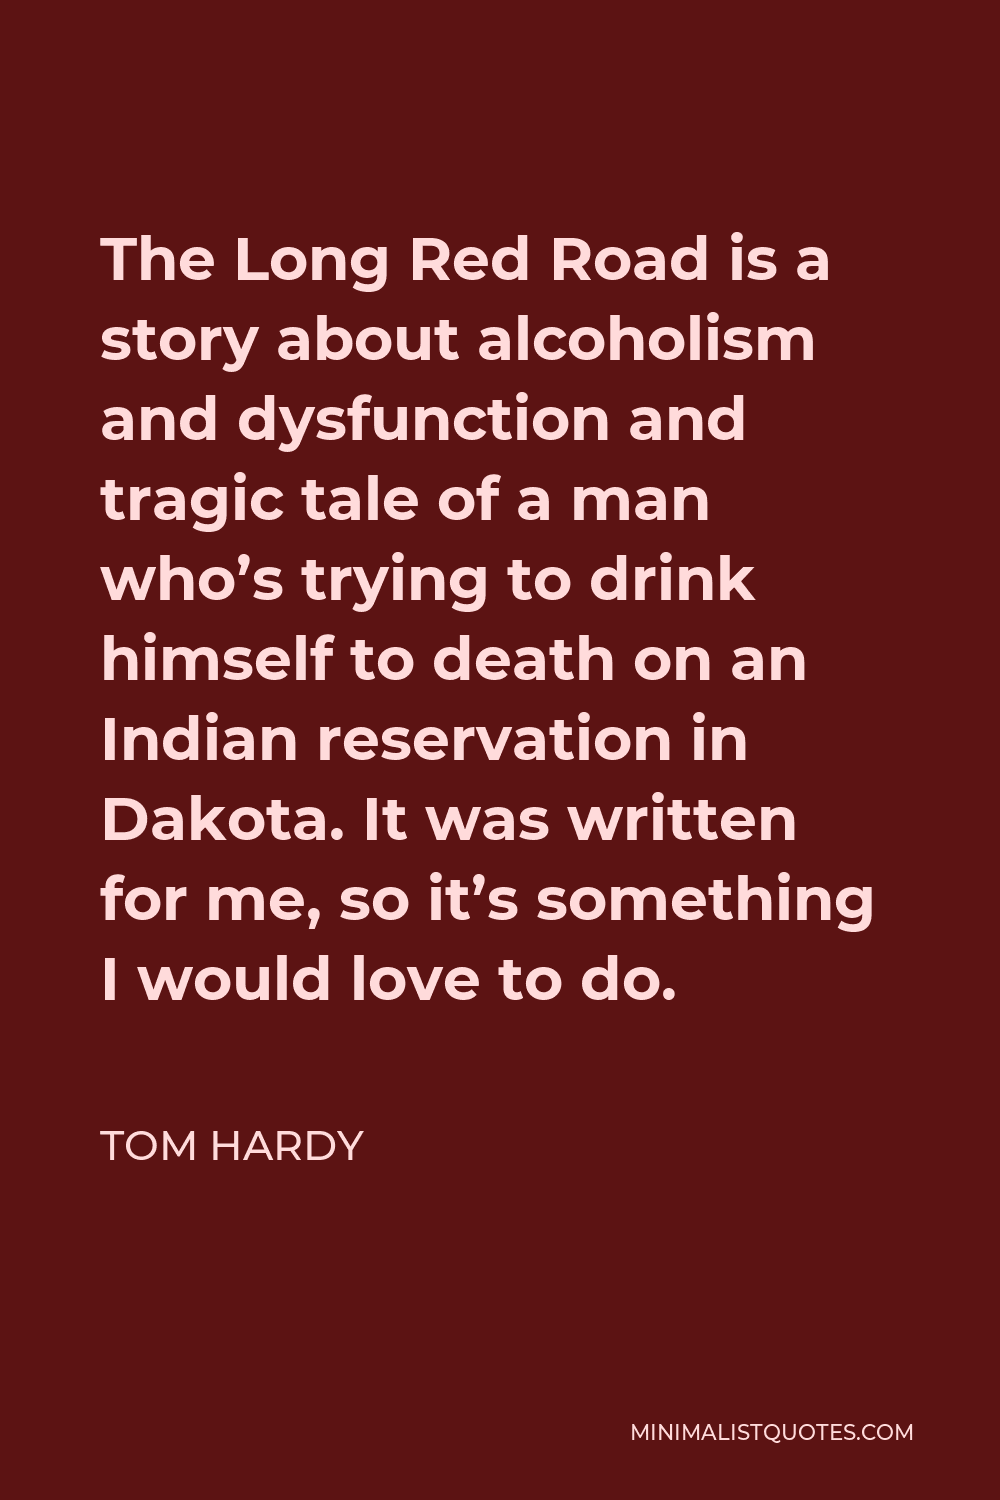 Tom Hardy Quote - The Long Red Road is a story about alcoholism and dysfunction and tragic tale of a man who’s trying to drink himself to death on an Indian reservation in Dakota. It was written for me, so it’s something I would love to do.